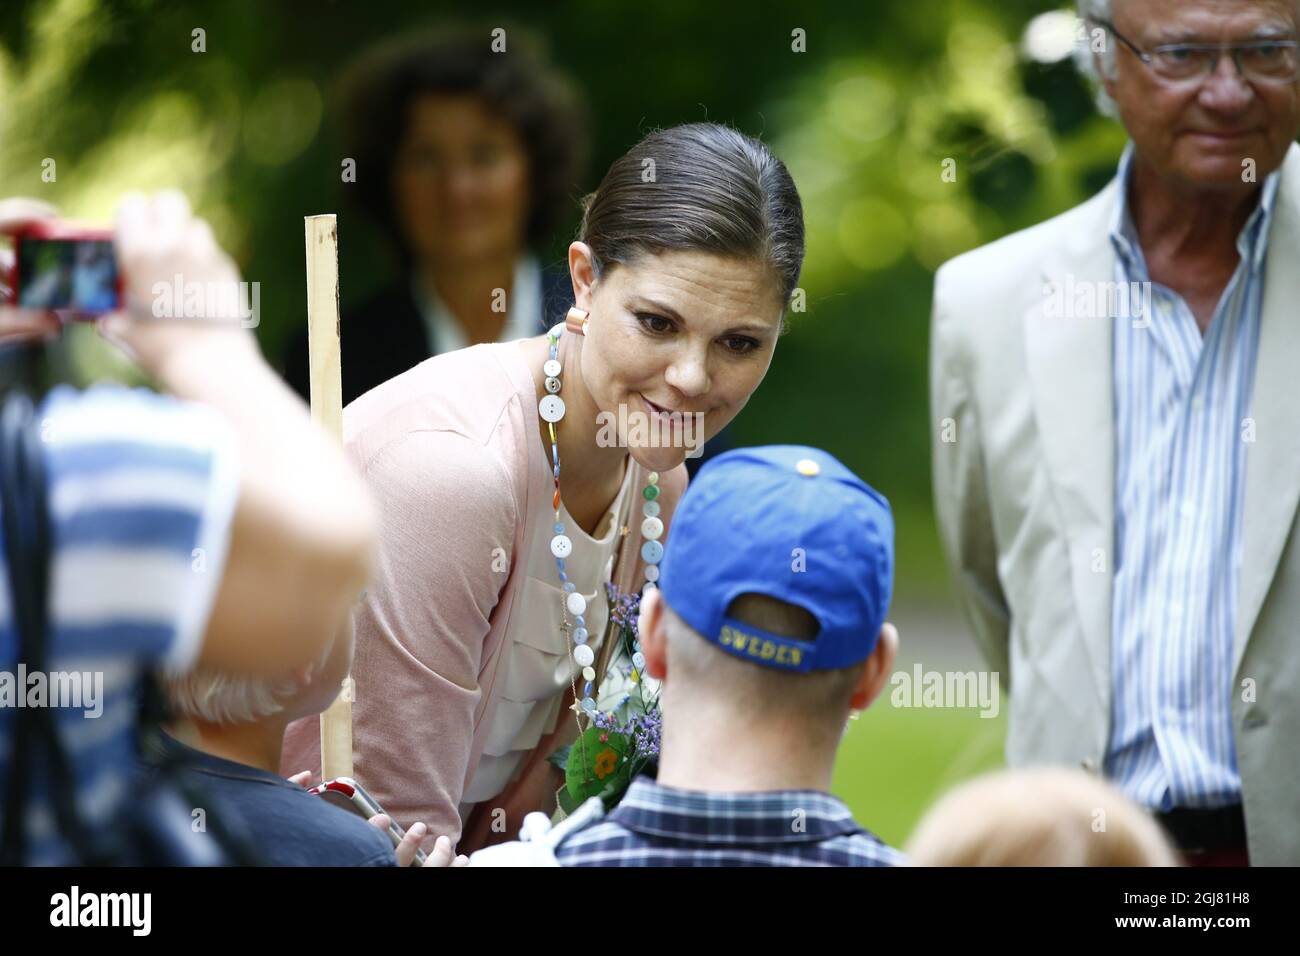 BORGHOLM 20130714 Swedish Crown Princess Victoria and King Carl Gustaf greet the people at the courtyard of the royal family's summer residence Solliden, on the island of Oeland, Sweden, on July 14, 2012, during the celebrations of Crown Princess Victorias 36th birthday. Photo: Jonas Ekstromer / SCANPIX / code 610030  Stock Photo